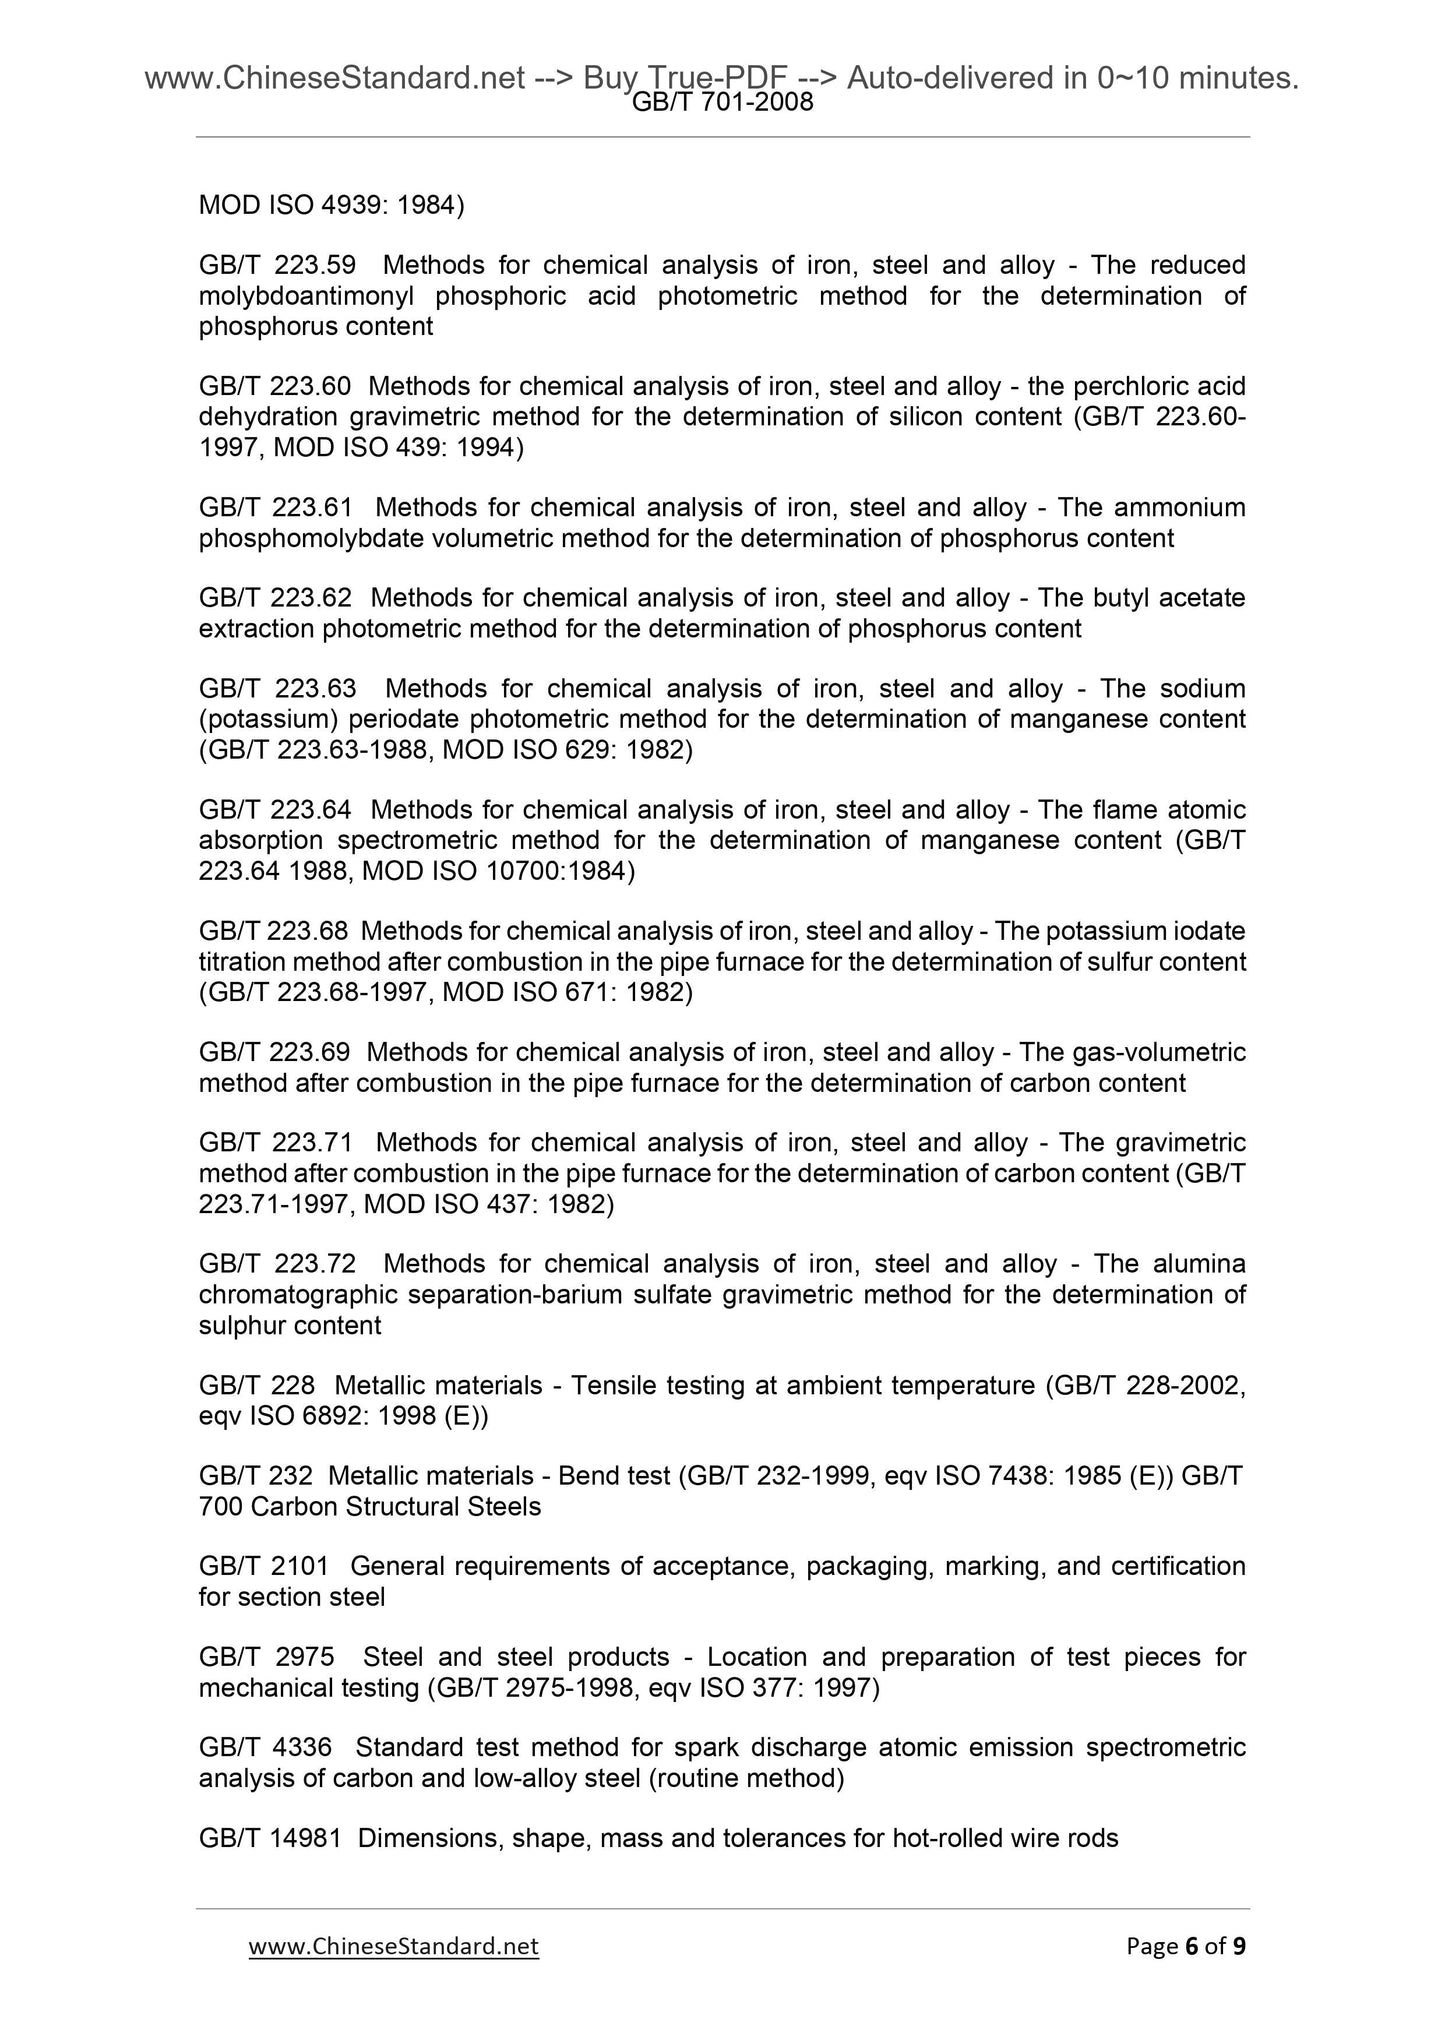 GB/T 701-2008 Page 5